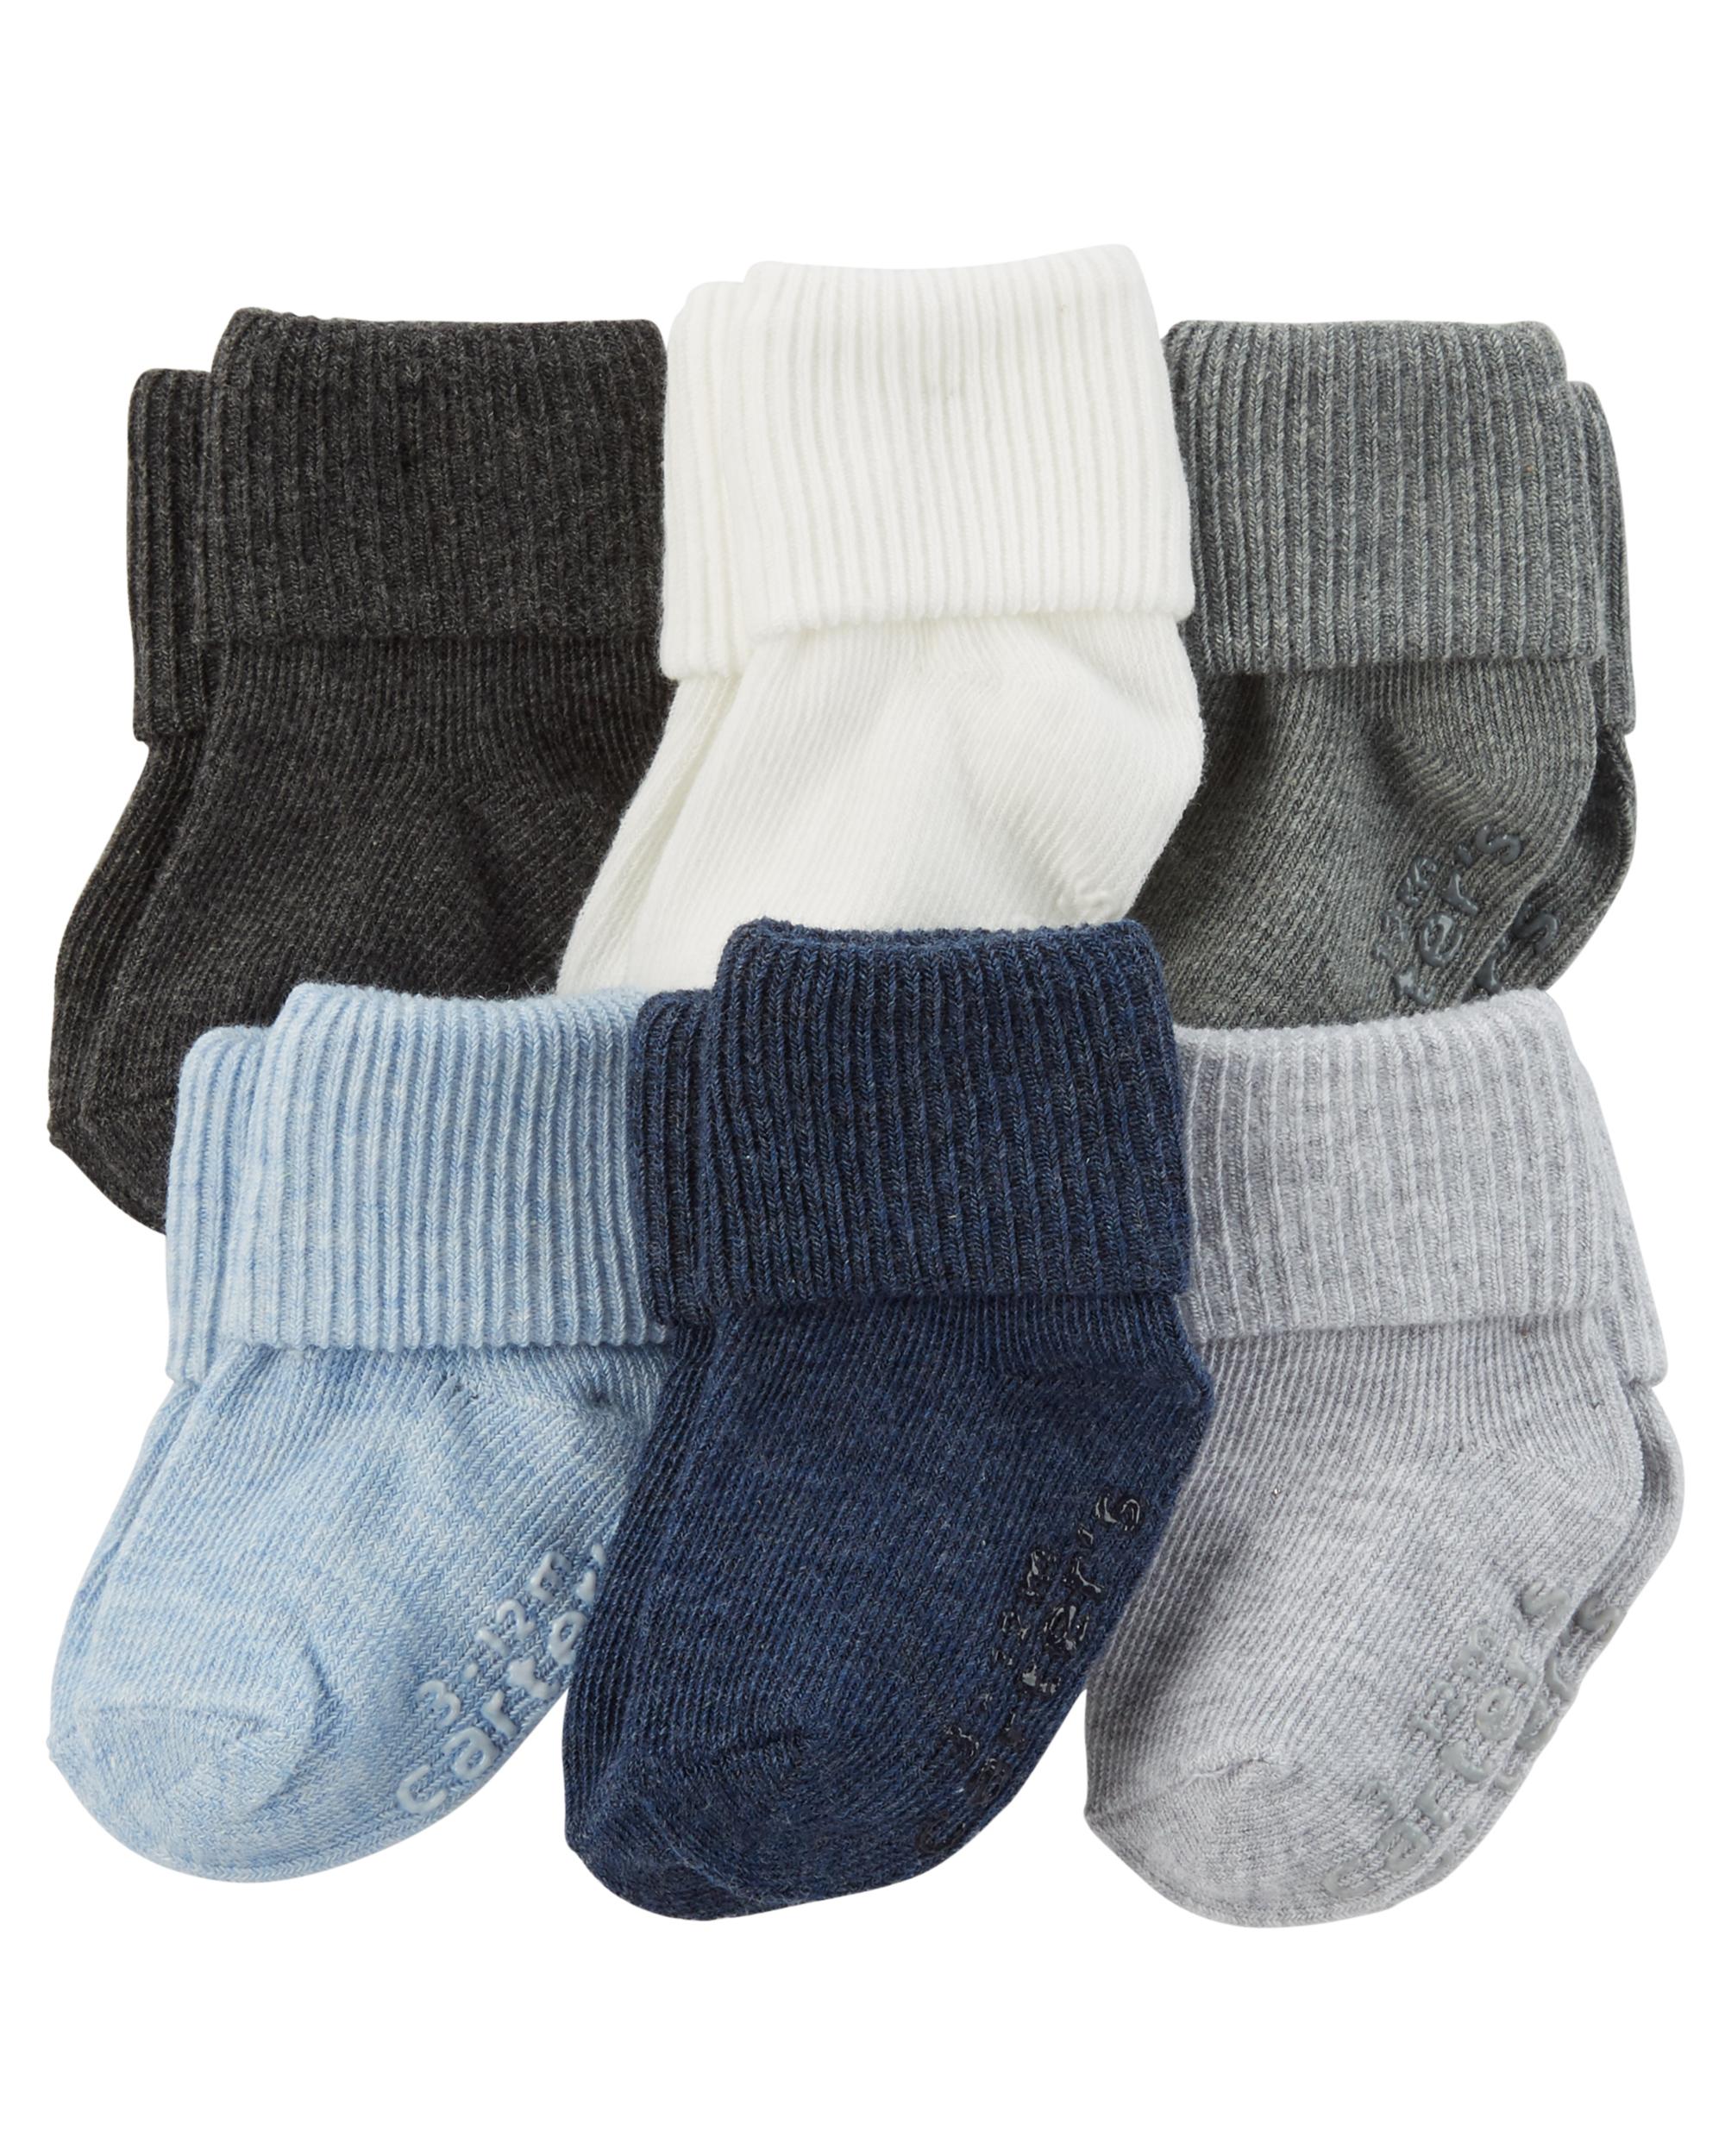 6-Pack Cuff Booties | carters.com